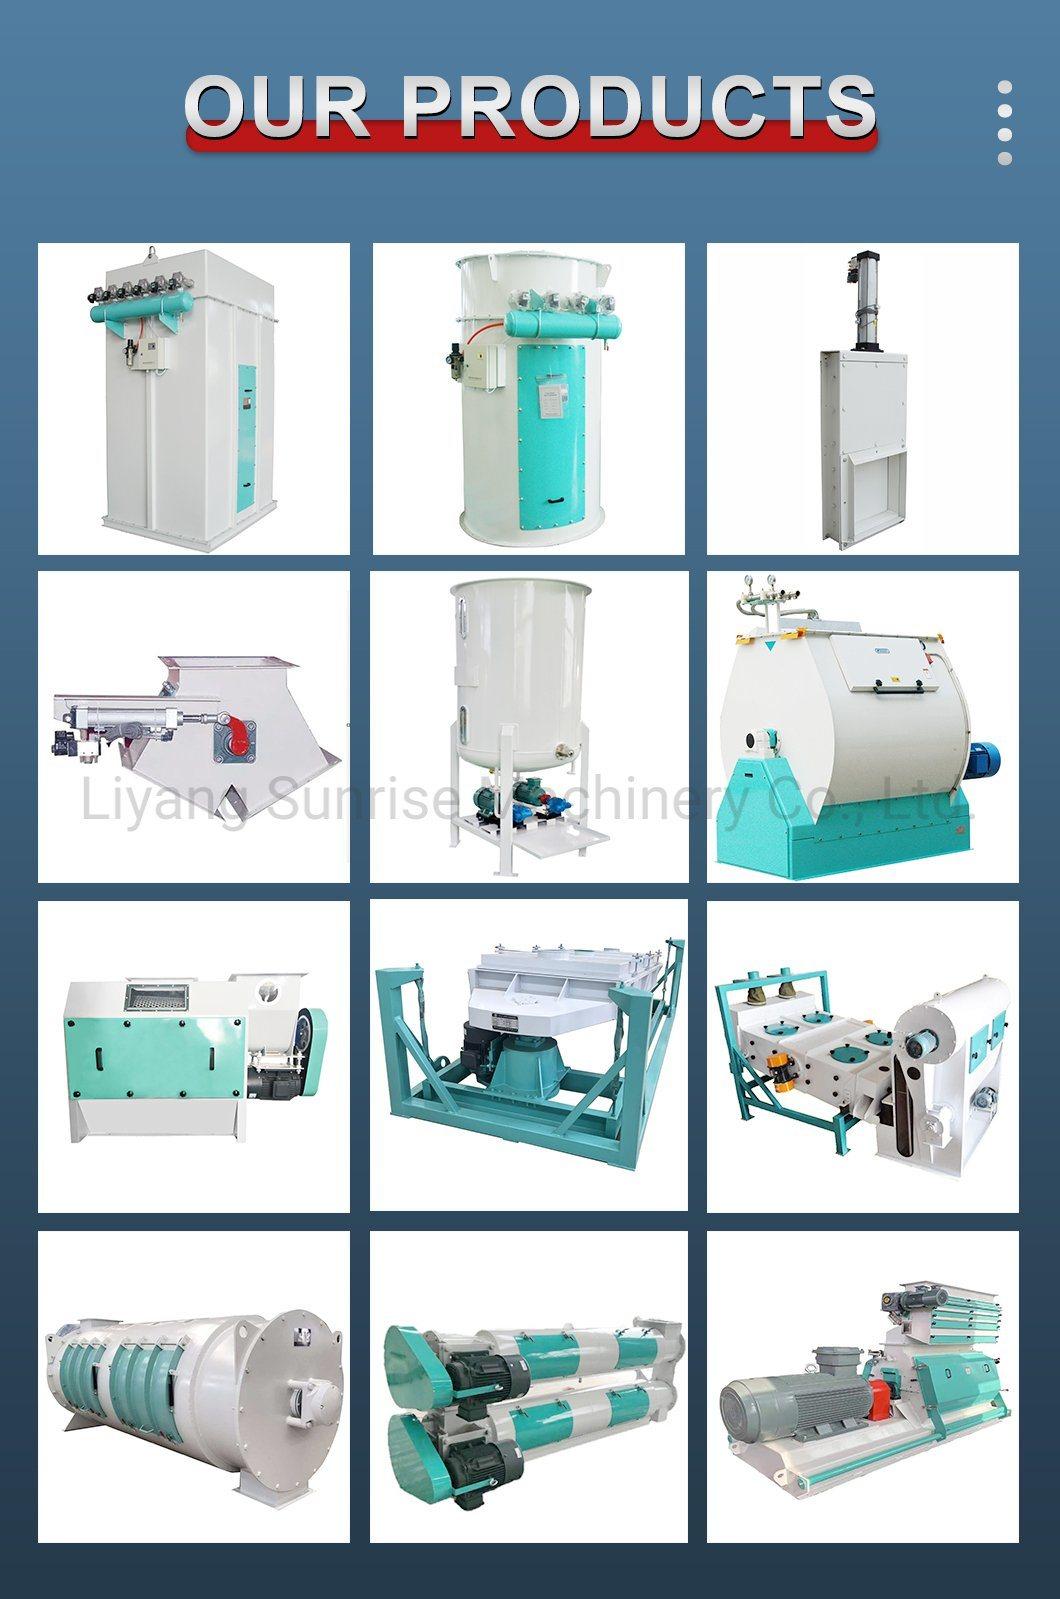 Swfp Series Wide Hammer Mill for Feed Process Machine on Sale